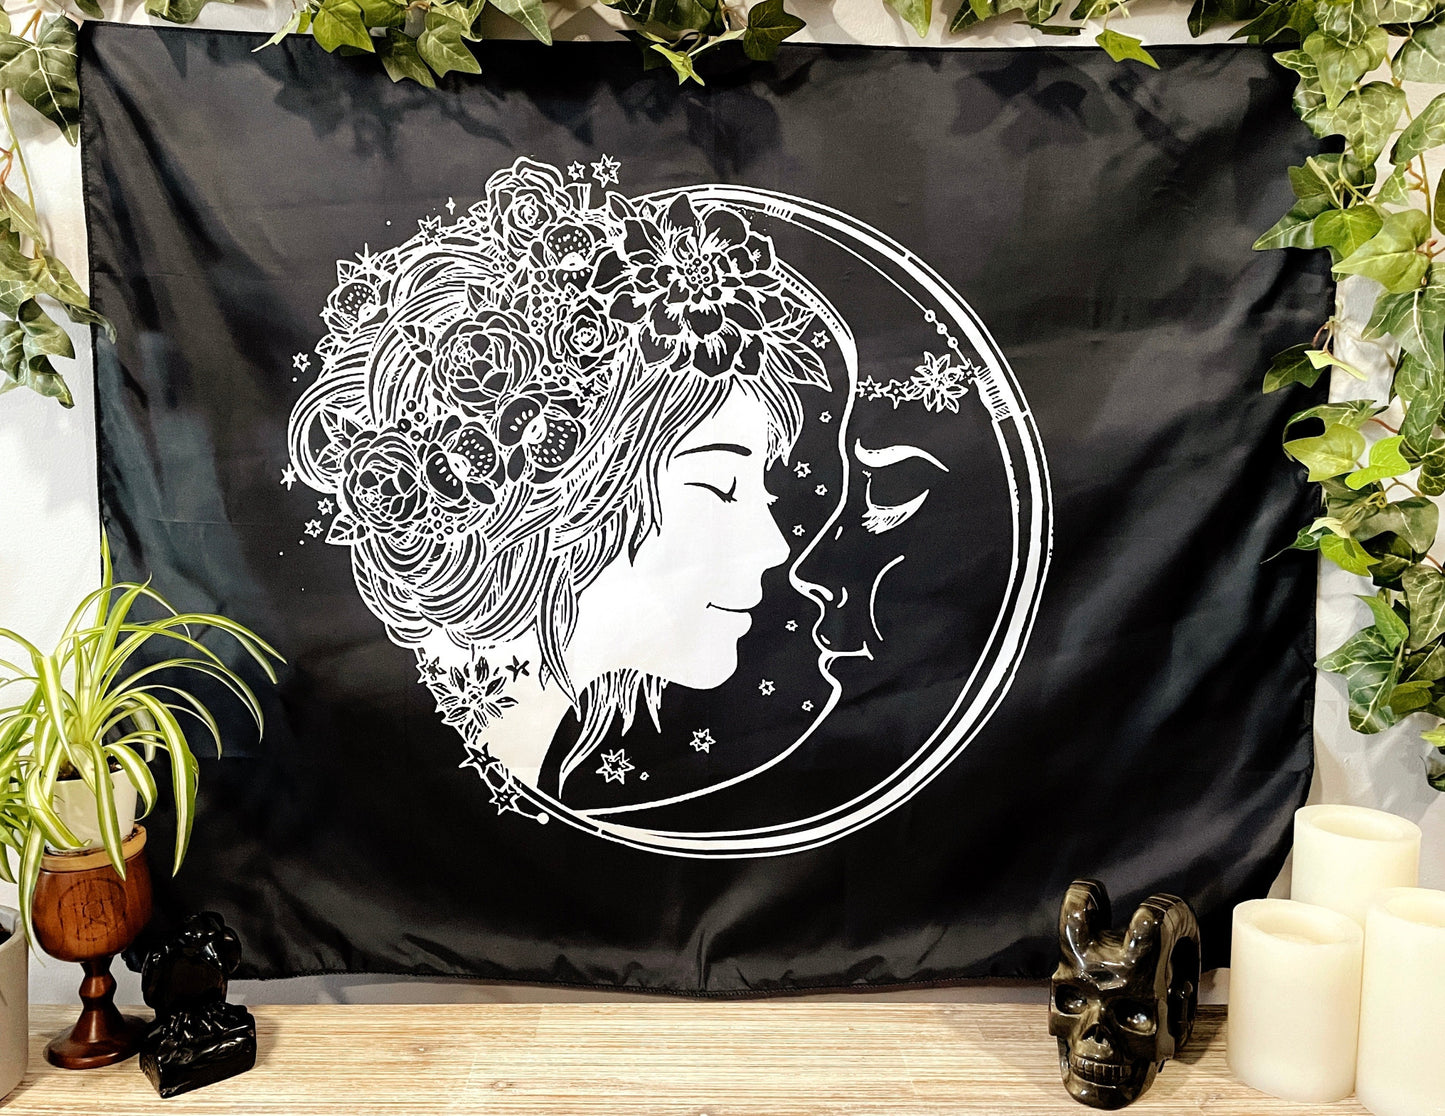 Pictured is a large wall tapestry with a black background and a woman with flowers in her hair smiling at a crescent moon printed in white on it.